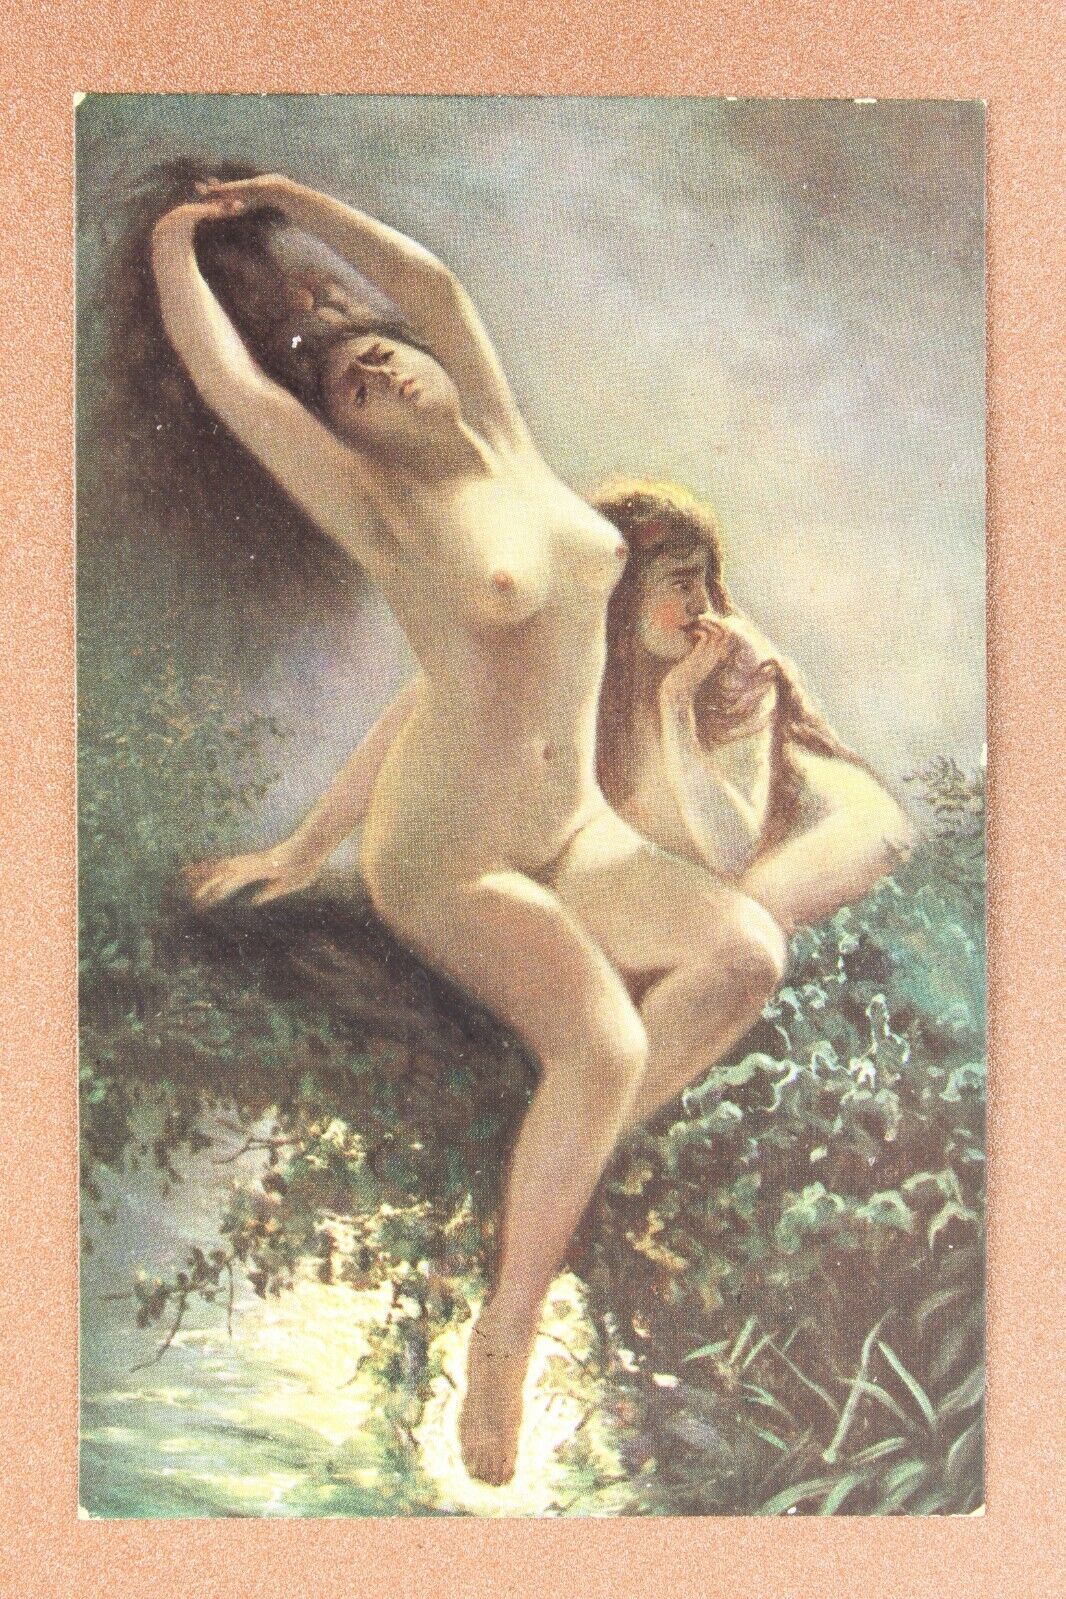 Nymph Nude Witch in moonlight. River Mermaid. Tsarist Russia postcard 1909s